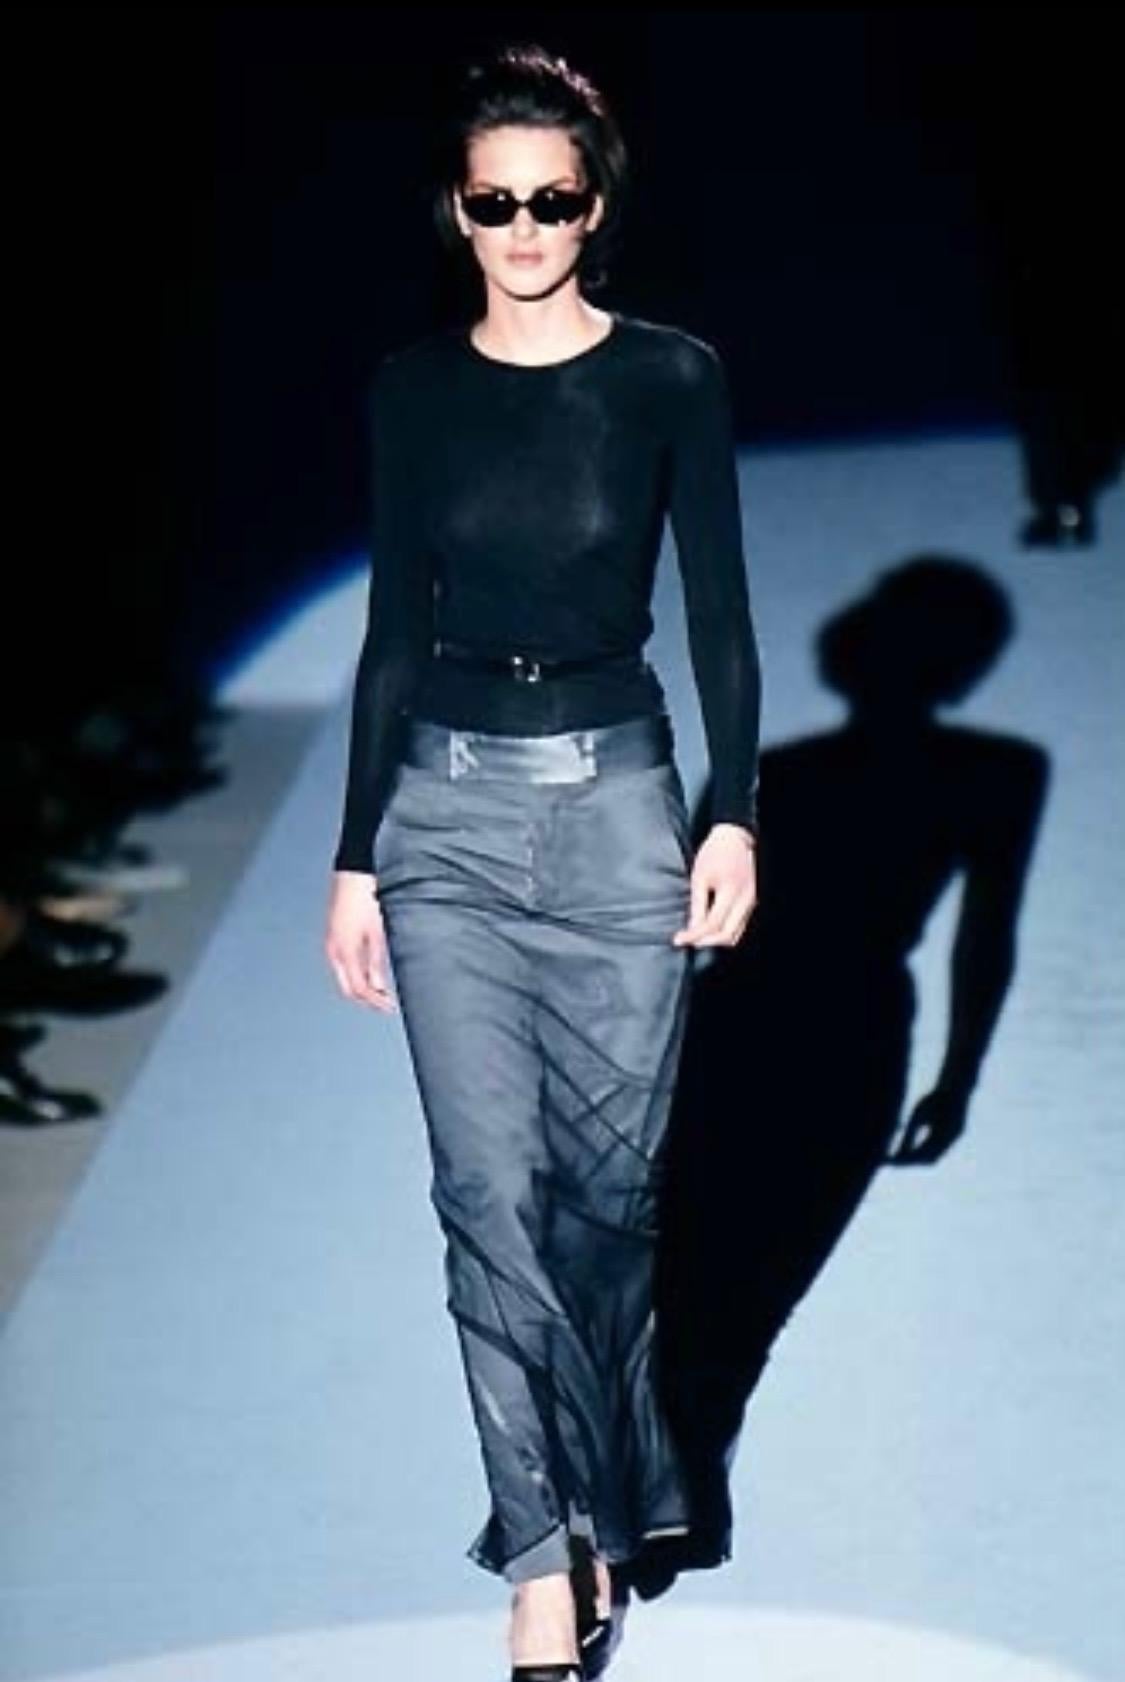 Presenting a full-length Gucci skirt, designed by Tom Ford. From the Fall/Winter 1998 collection, this skirt features a button closure, belt loops, and buckles at the waist which are all covered by a layer of tulle. Debuting on the runway, this